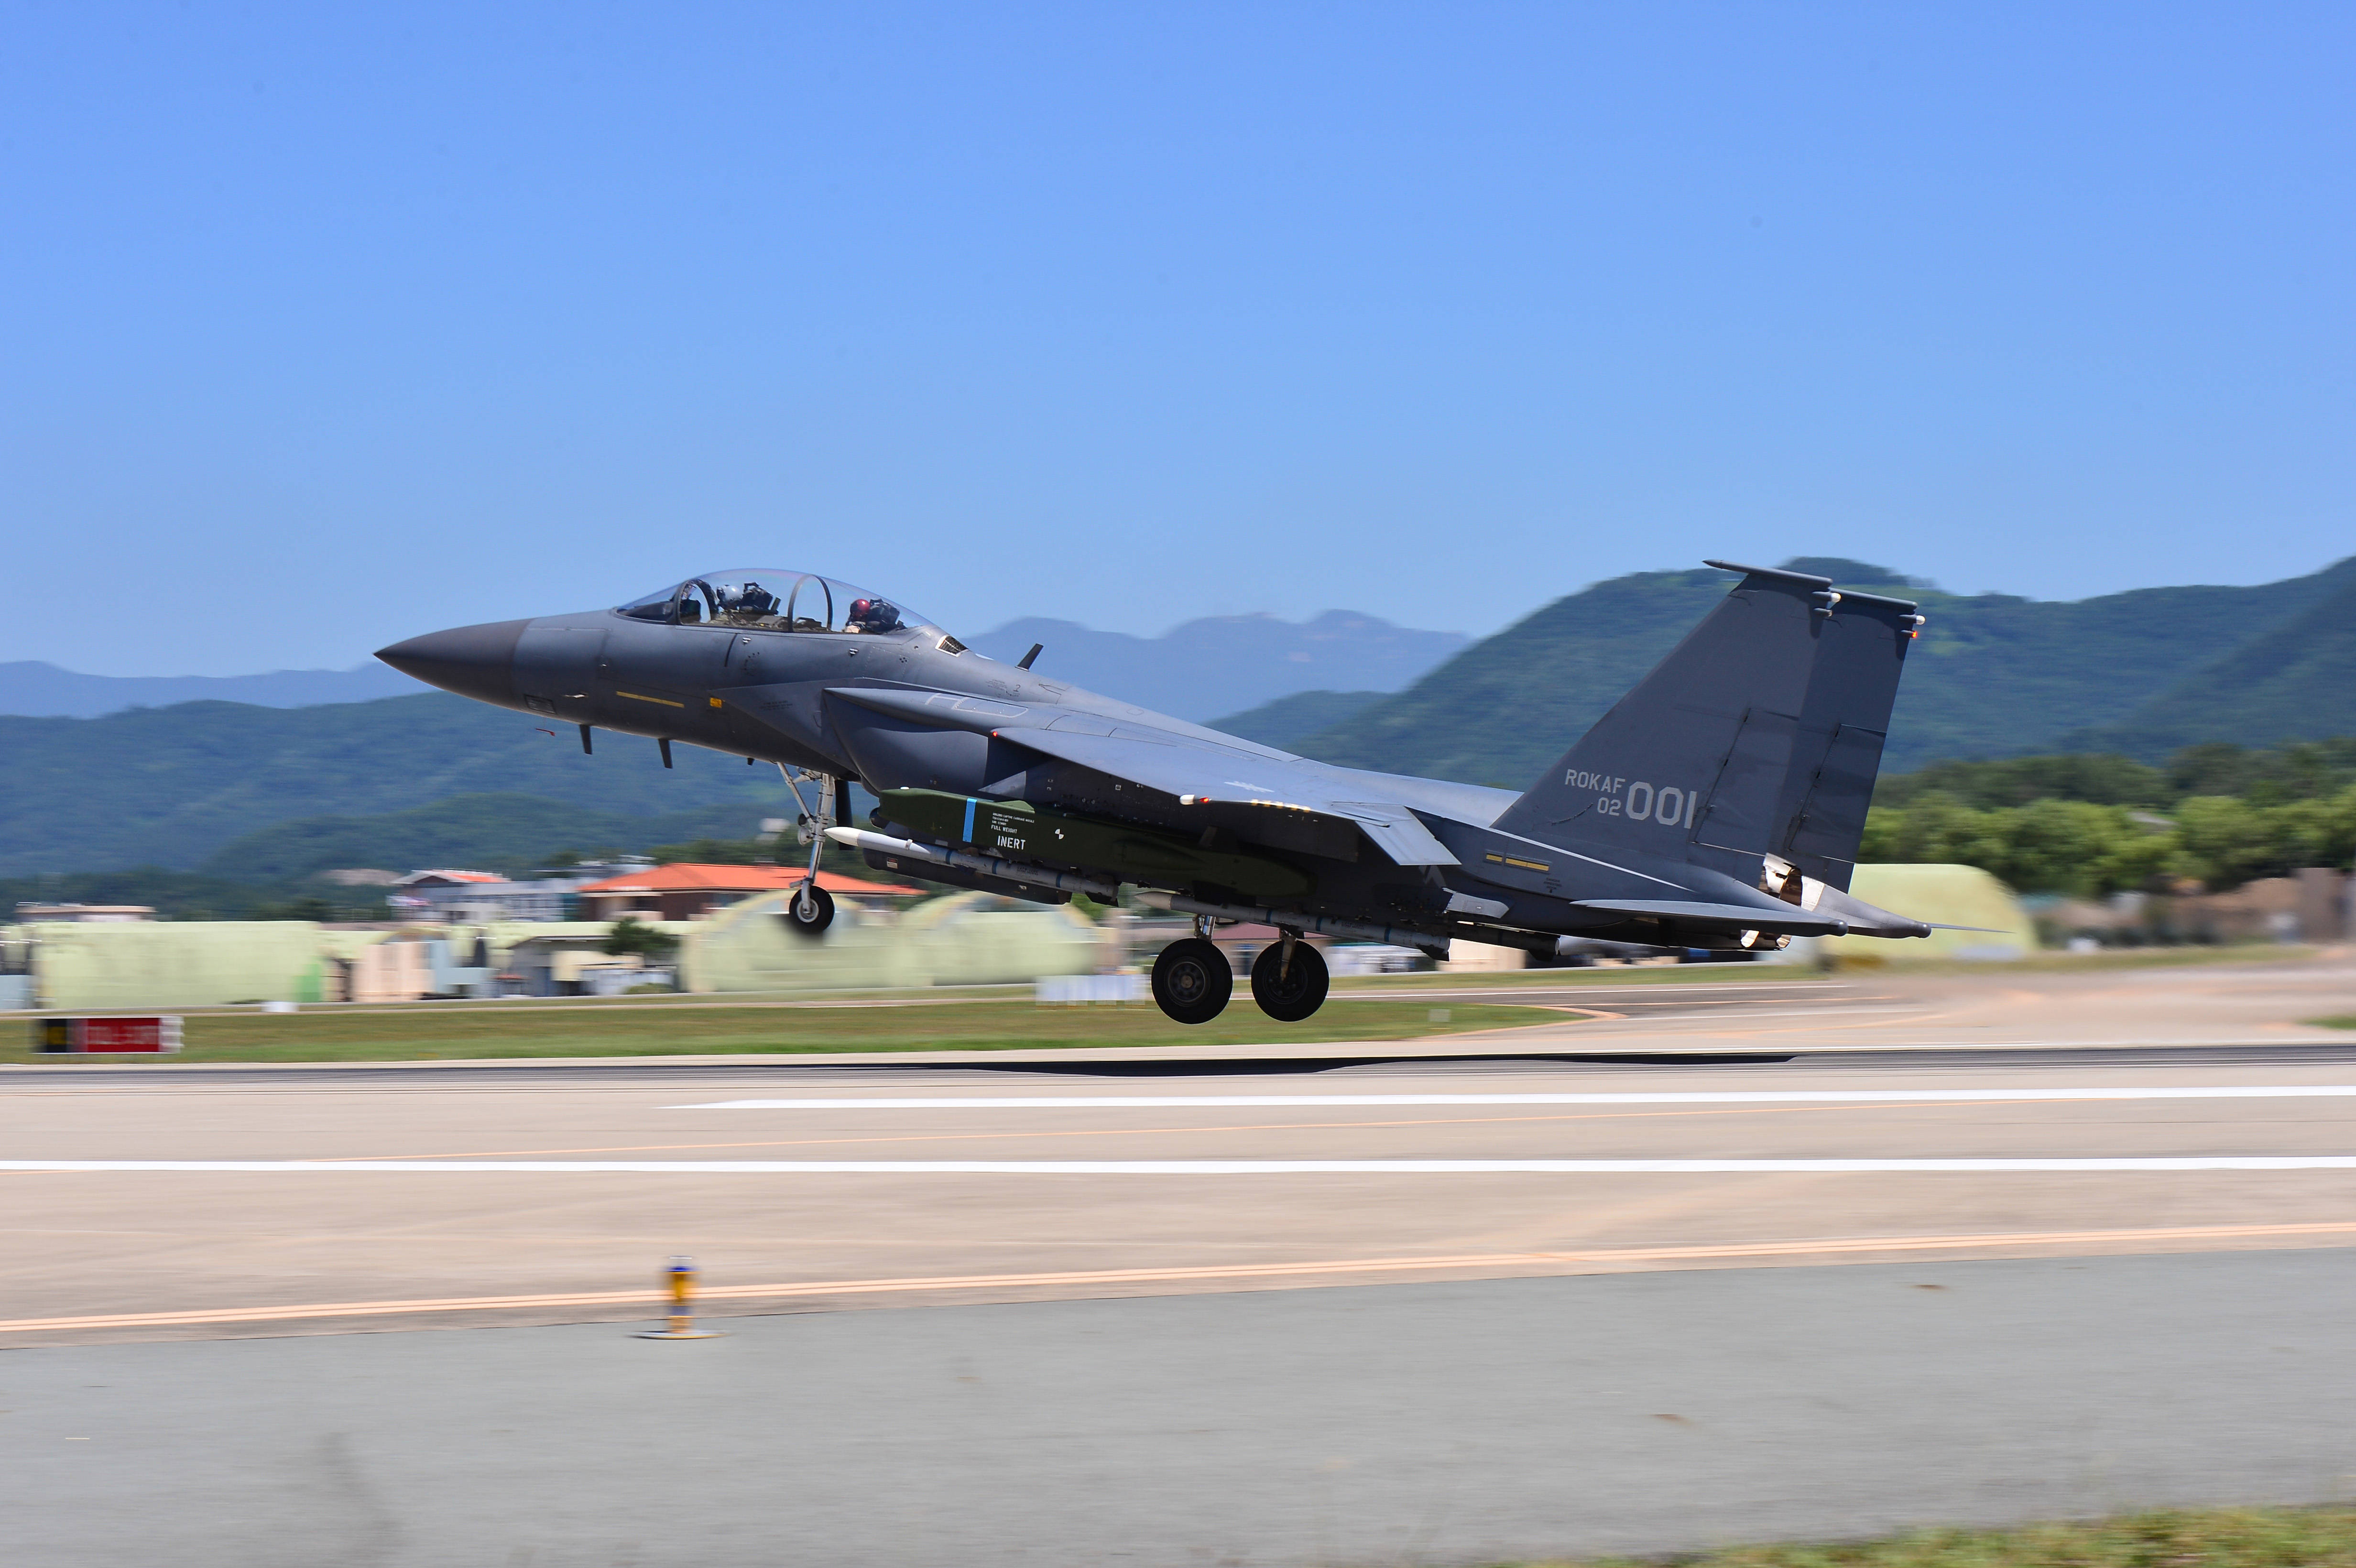 South Korea is one of the main operators of the Taurus KEPD cruise missile, which it has fitted to its F-15K Slam Eagle fighters, and manufacturer Taurus Systems is looking for a South Korean partner to develop new variants.